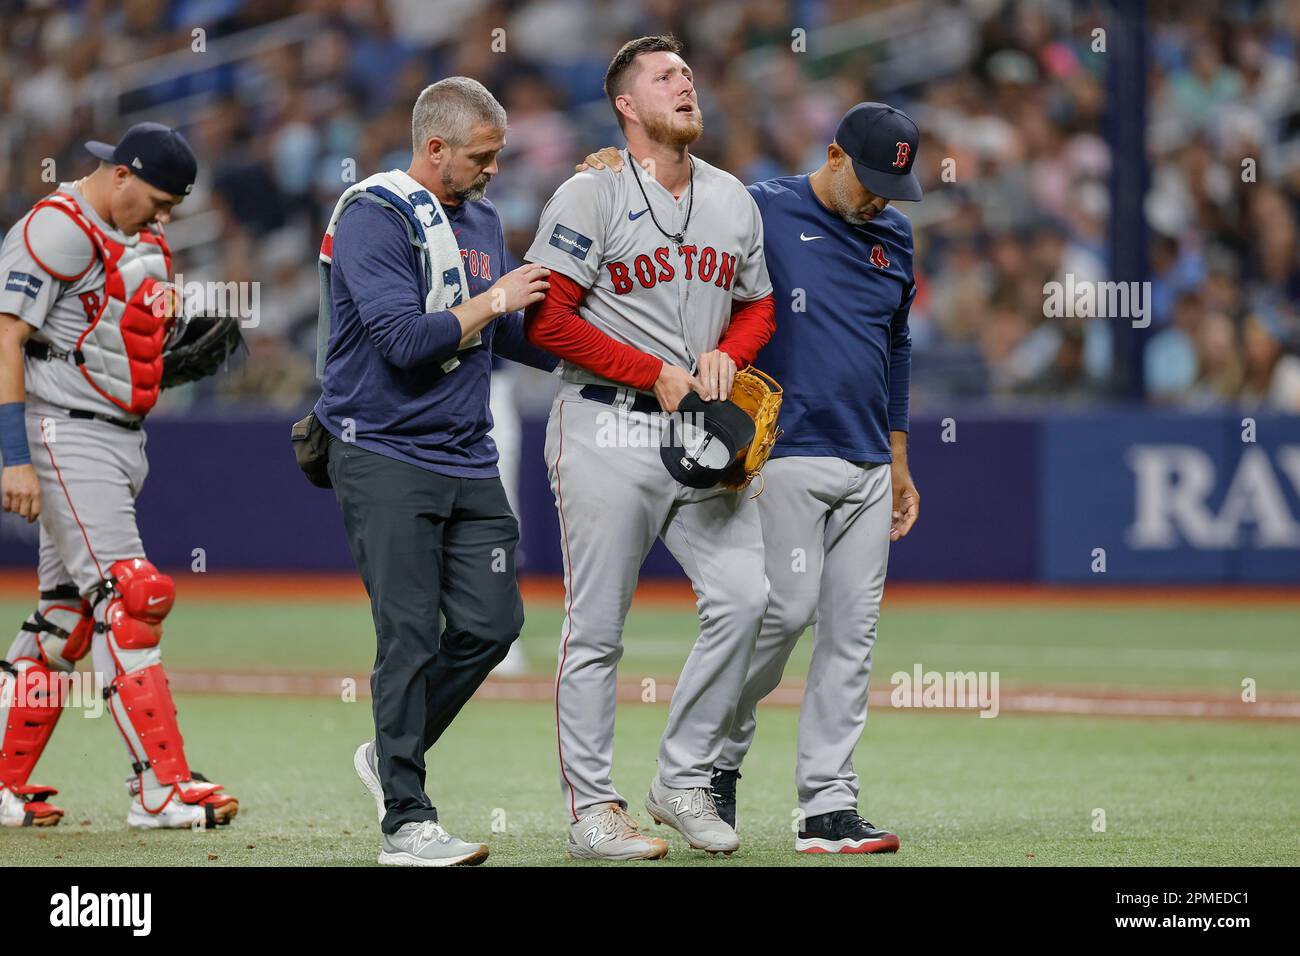 St. Petersburg, FL USA; Boston Red Sox relief pitcher Ryan Brasier (70) sustained an injury while pitching and is helped to the dugout during an MLB g Stock Photo